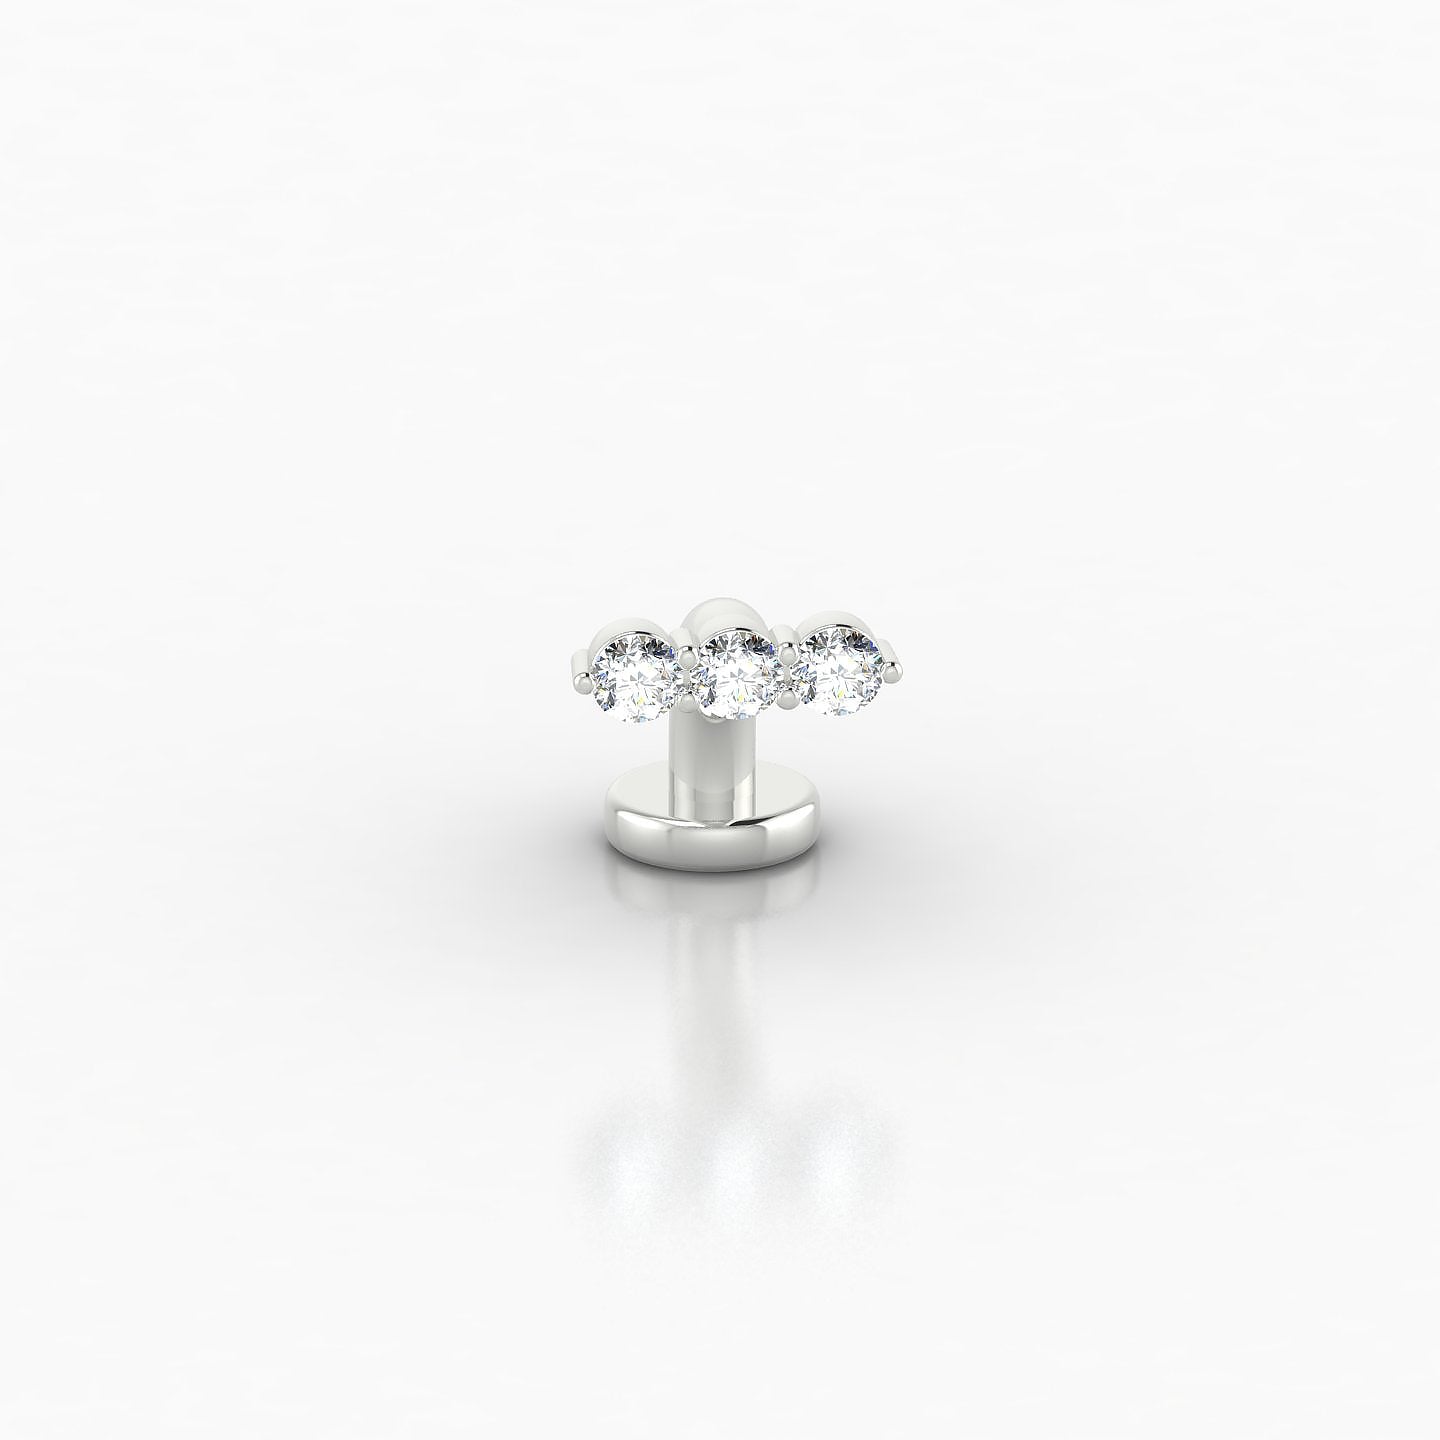 Ma'at | 18k White Gold 6 mm 6.5 mm Trilogy Diamond Floating Navel Piercing